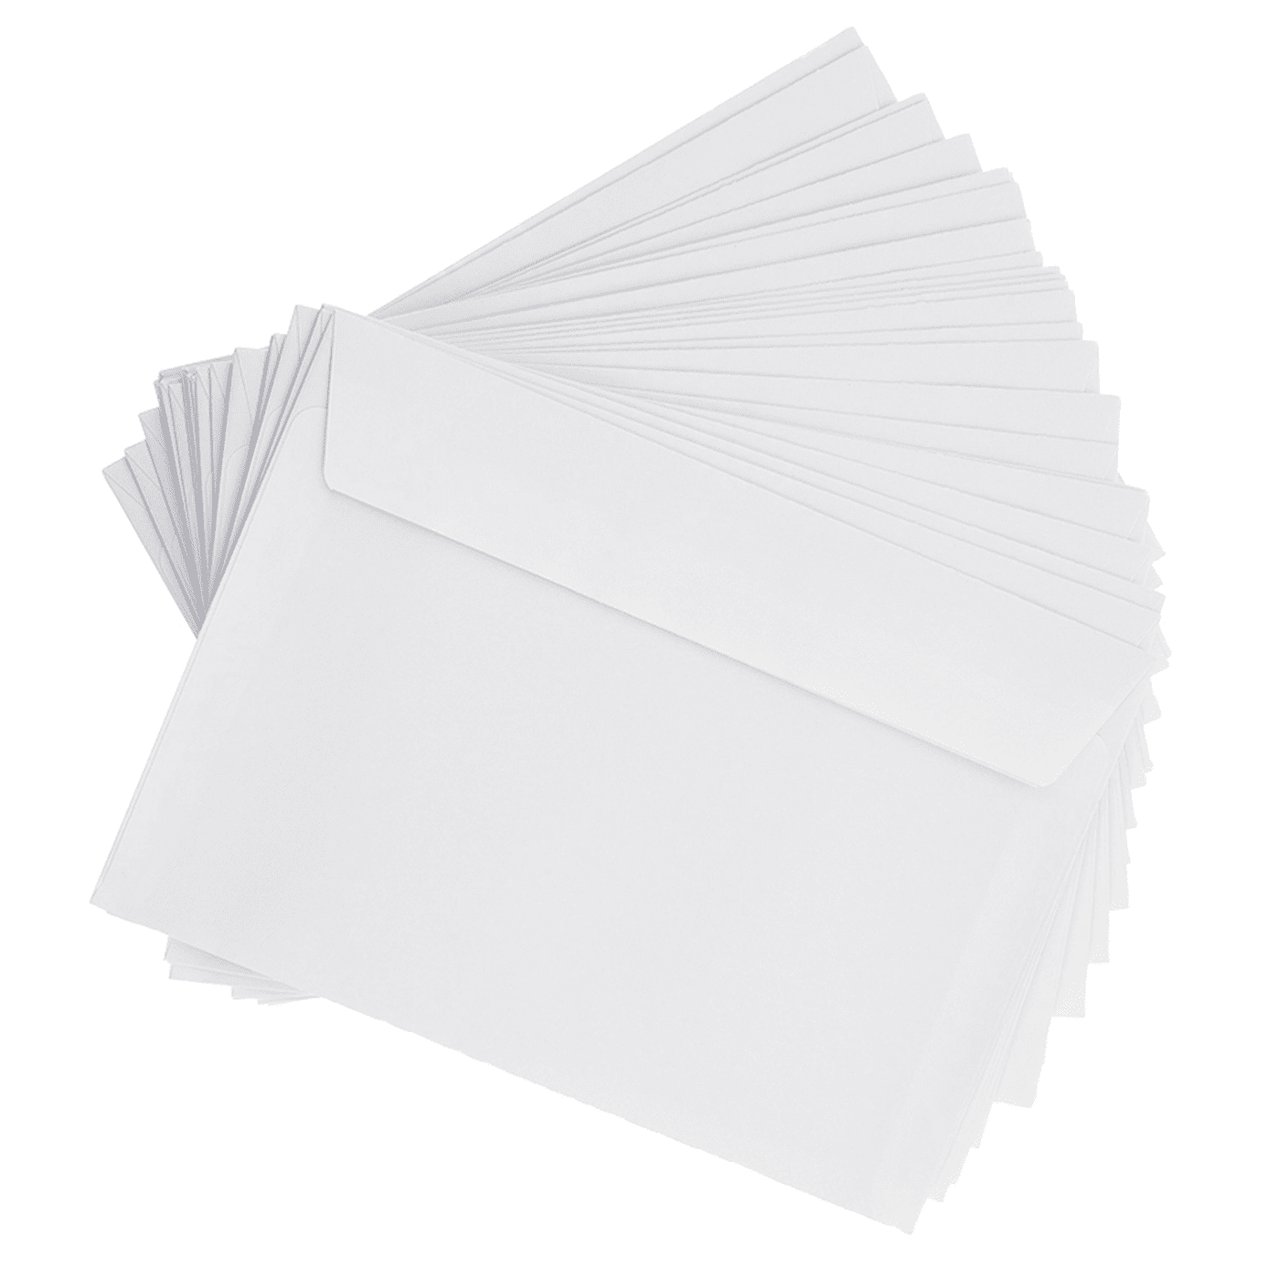 Clairecode 110x220mm envelope 80gsm packed 25s. - Clairefontaine